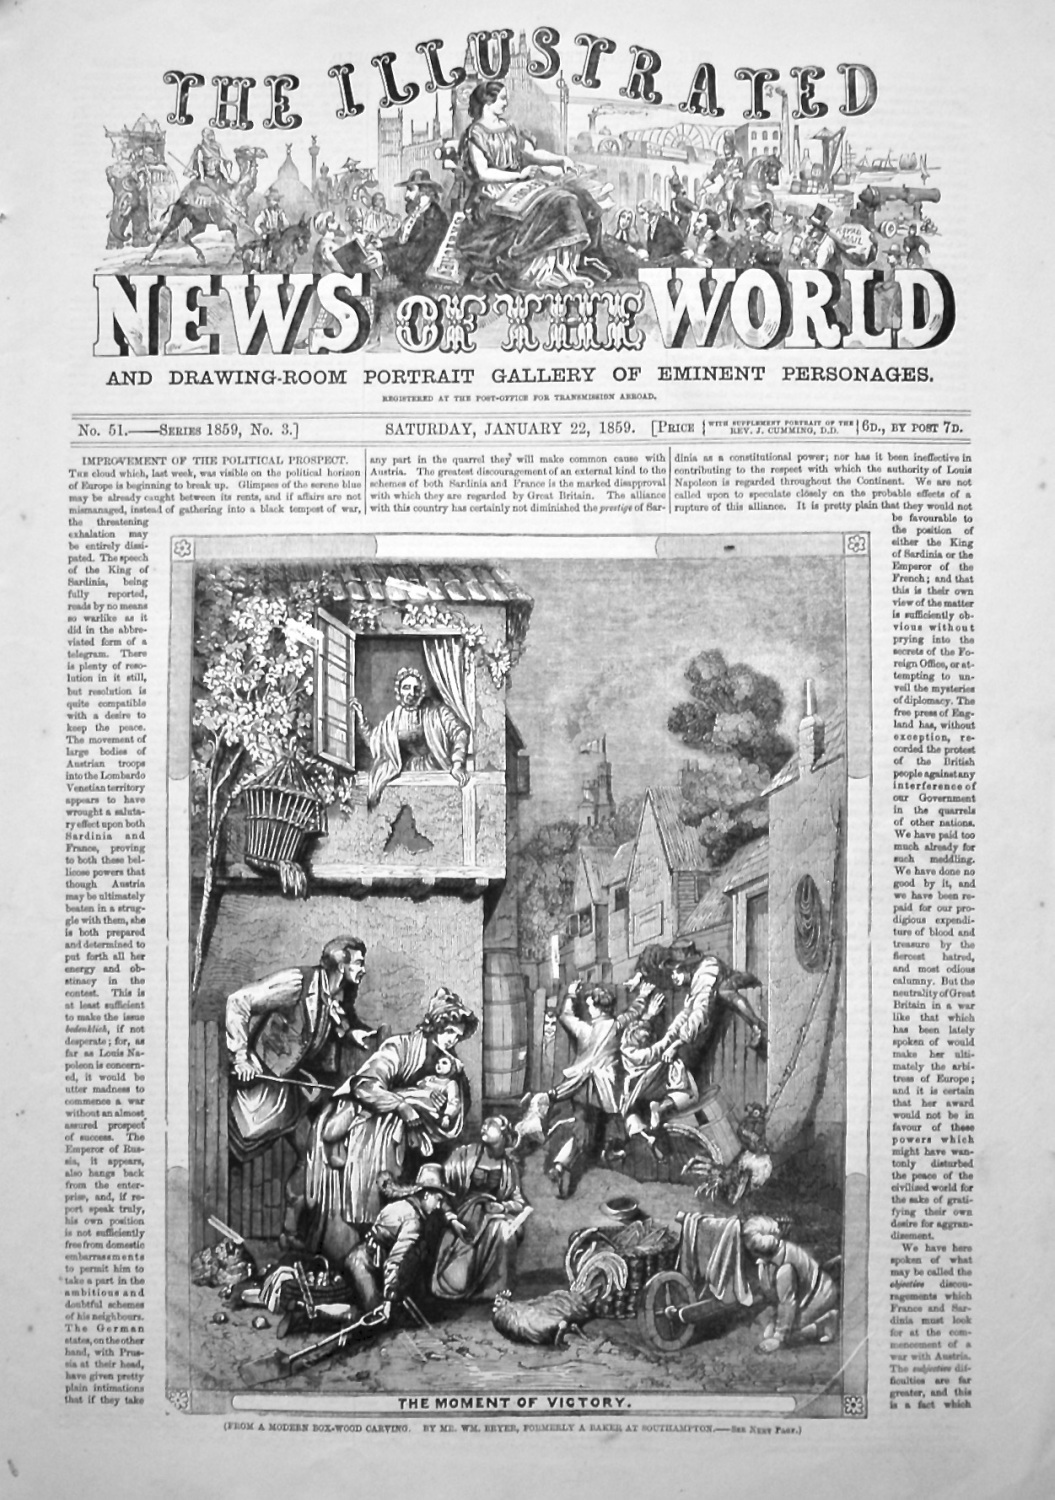 The Illustrated News of the World, January 22nd, 1859.